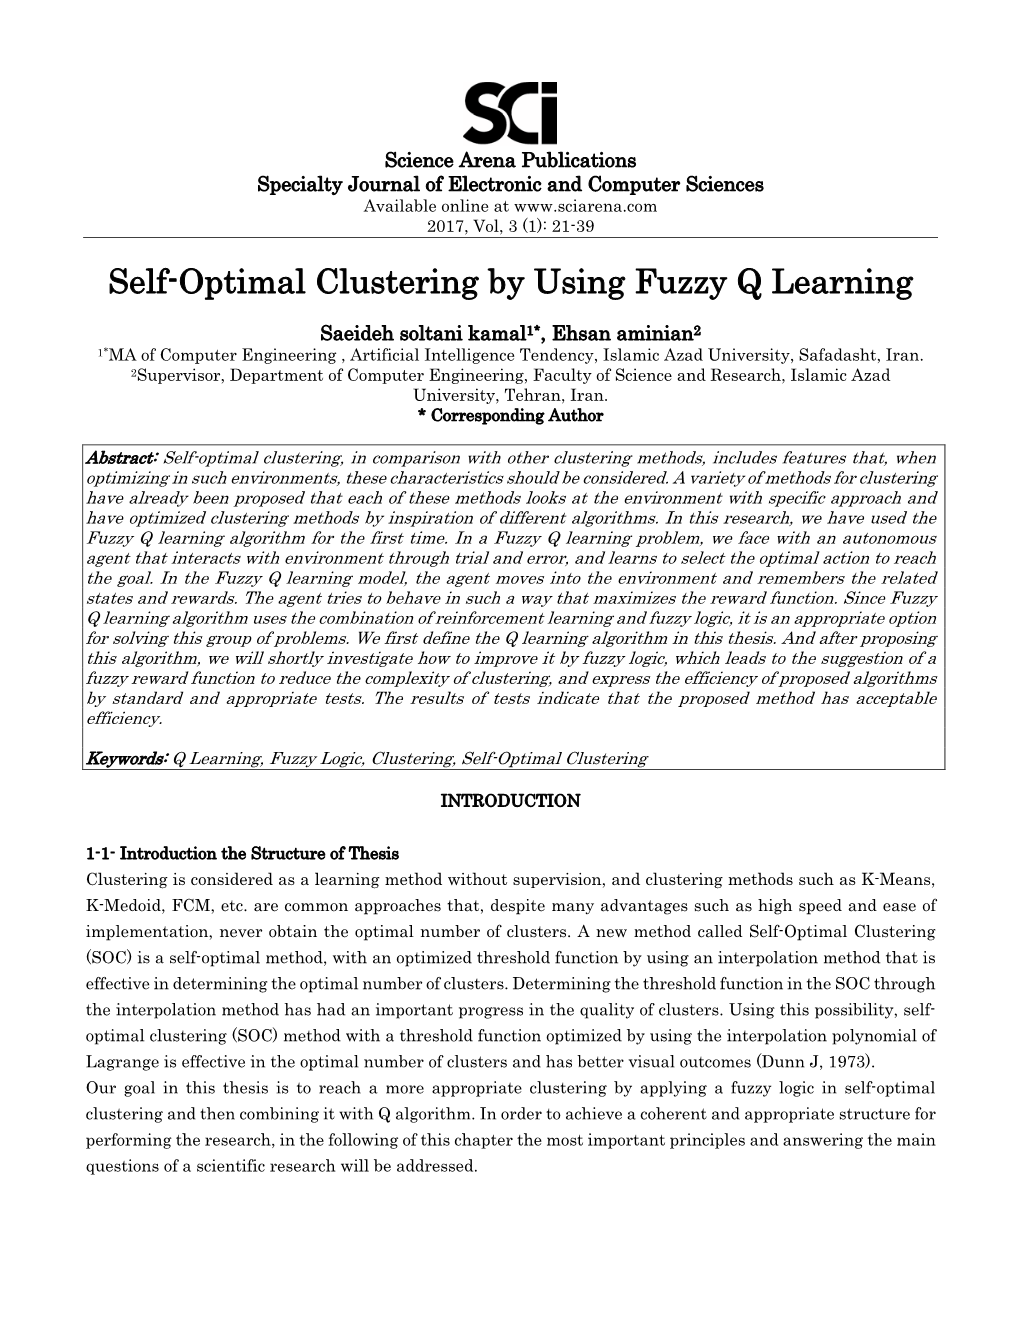 Self-Optimal Clustering by Using Fuzzy Q Learning